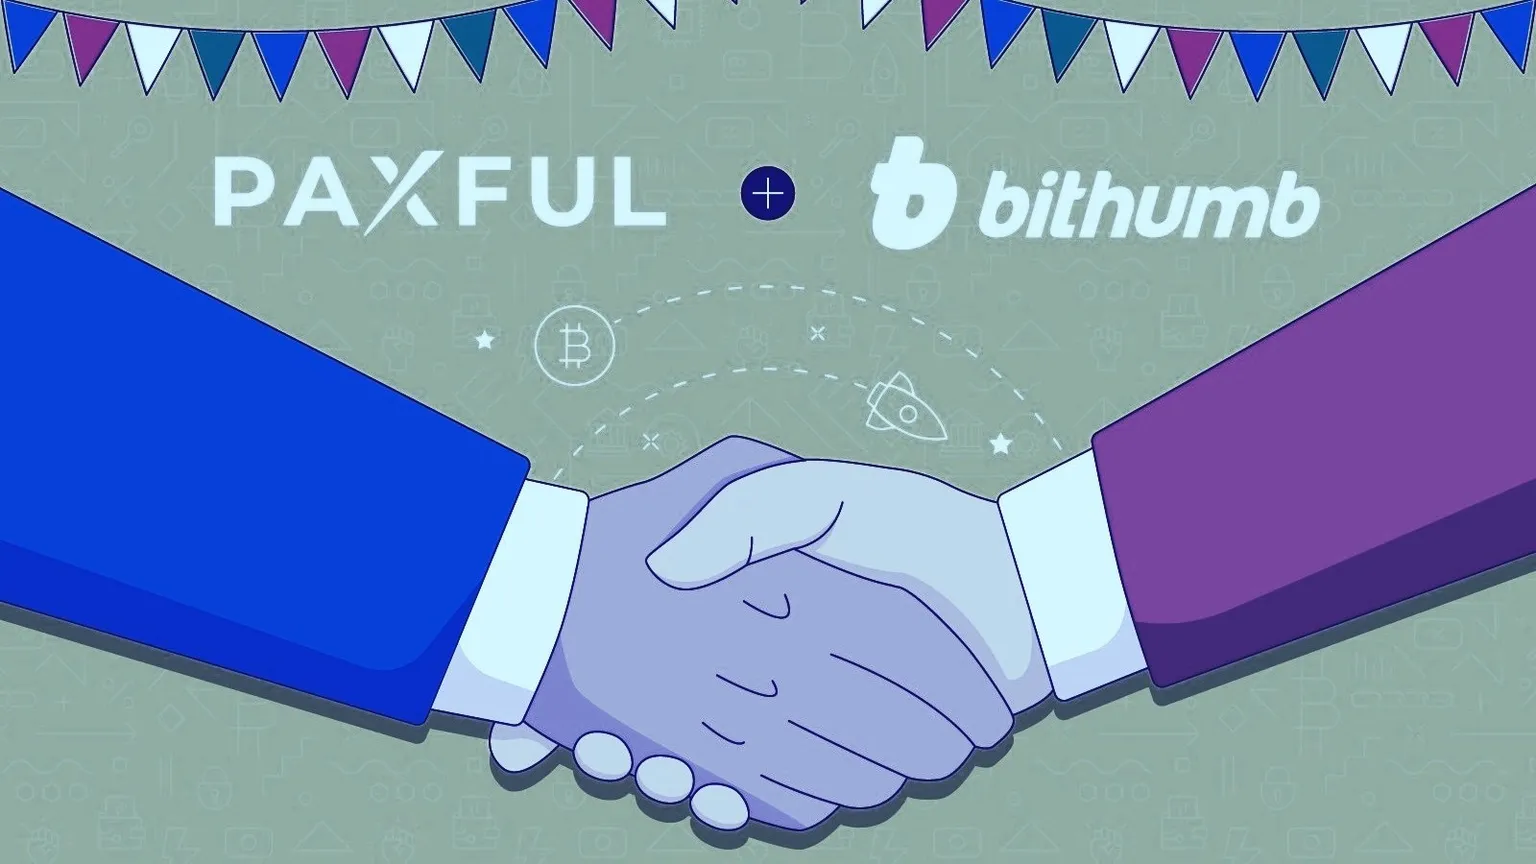 "Both envision a fruitful partnership as they share a mutual goal of bringing financial inclusion closer." Image: Paxful